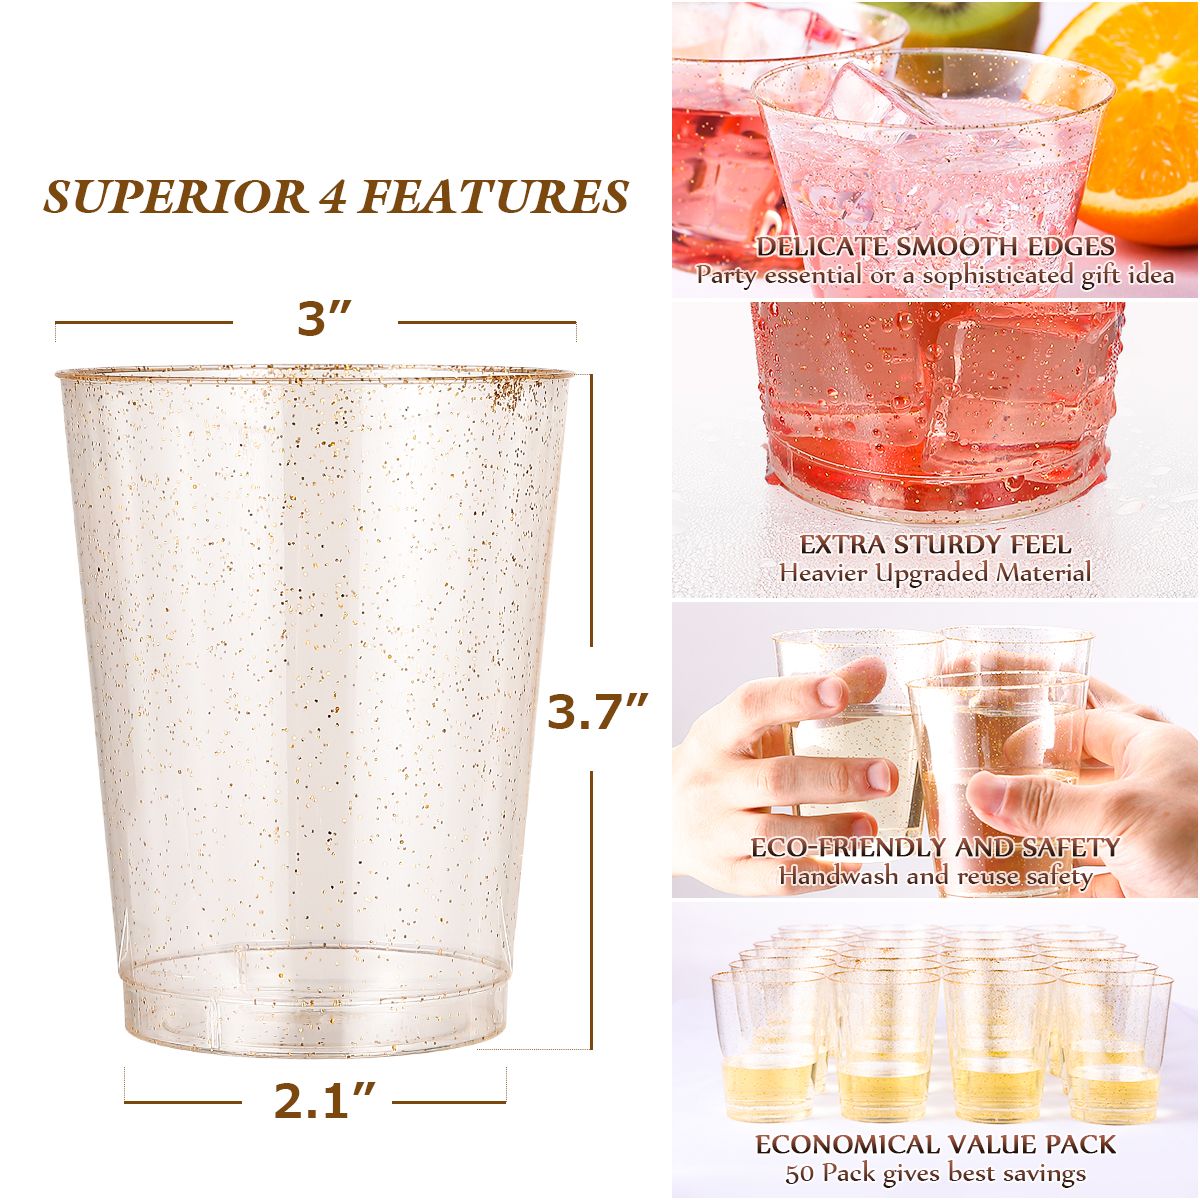 Exquisite 12 Ounce Disposable Clear Plastic Cups-50 Count